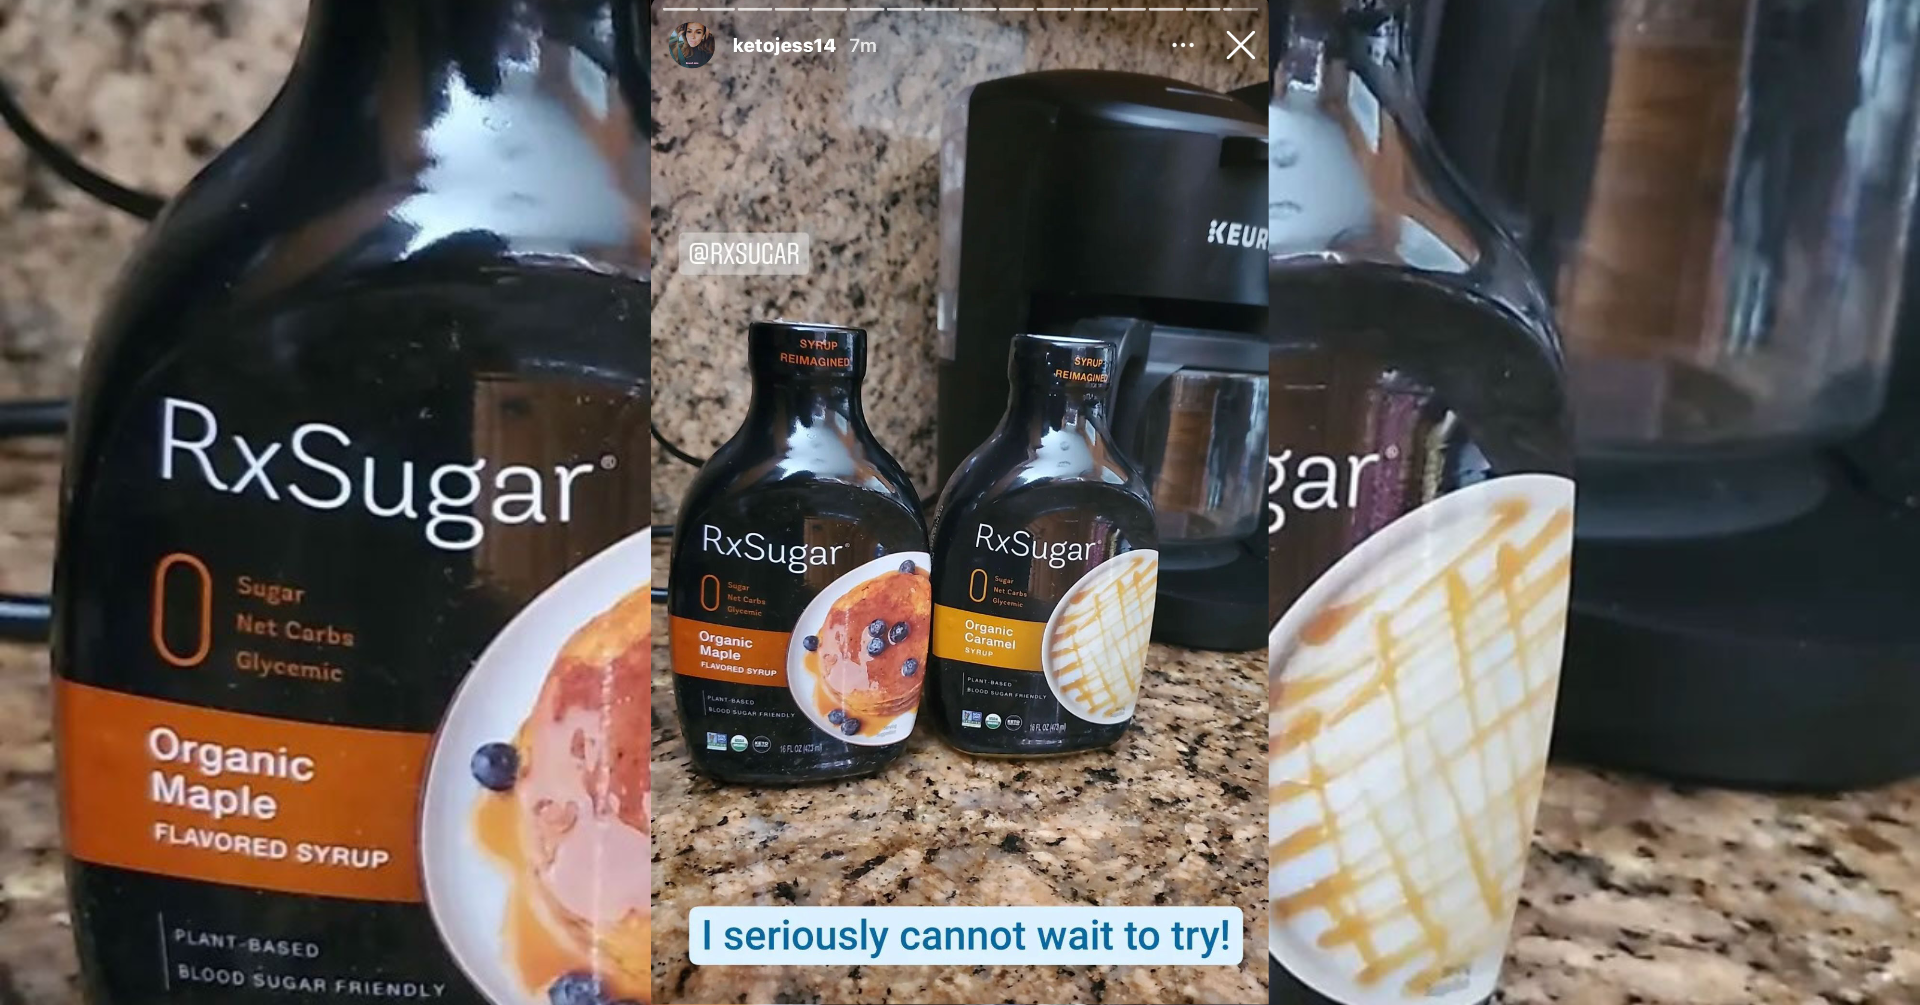 Keto Jess 14 Excited To Try Her New RxSugar